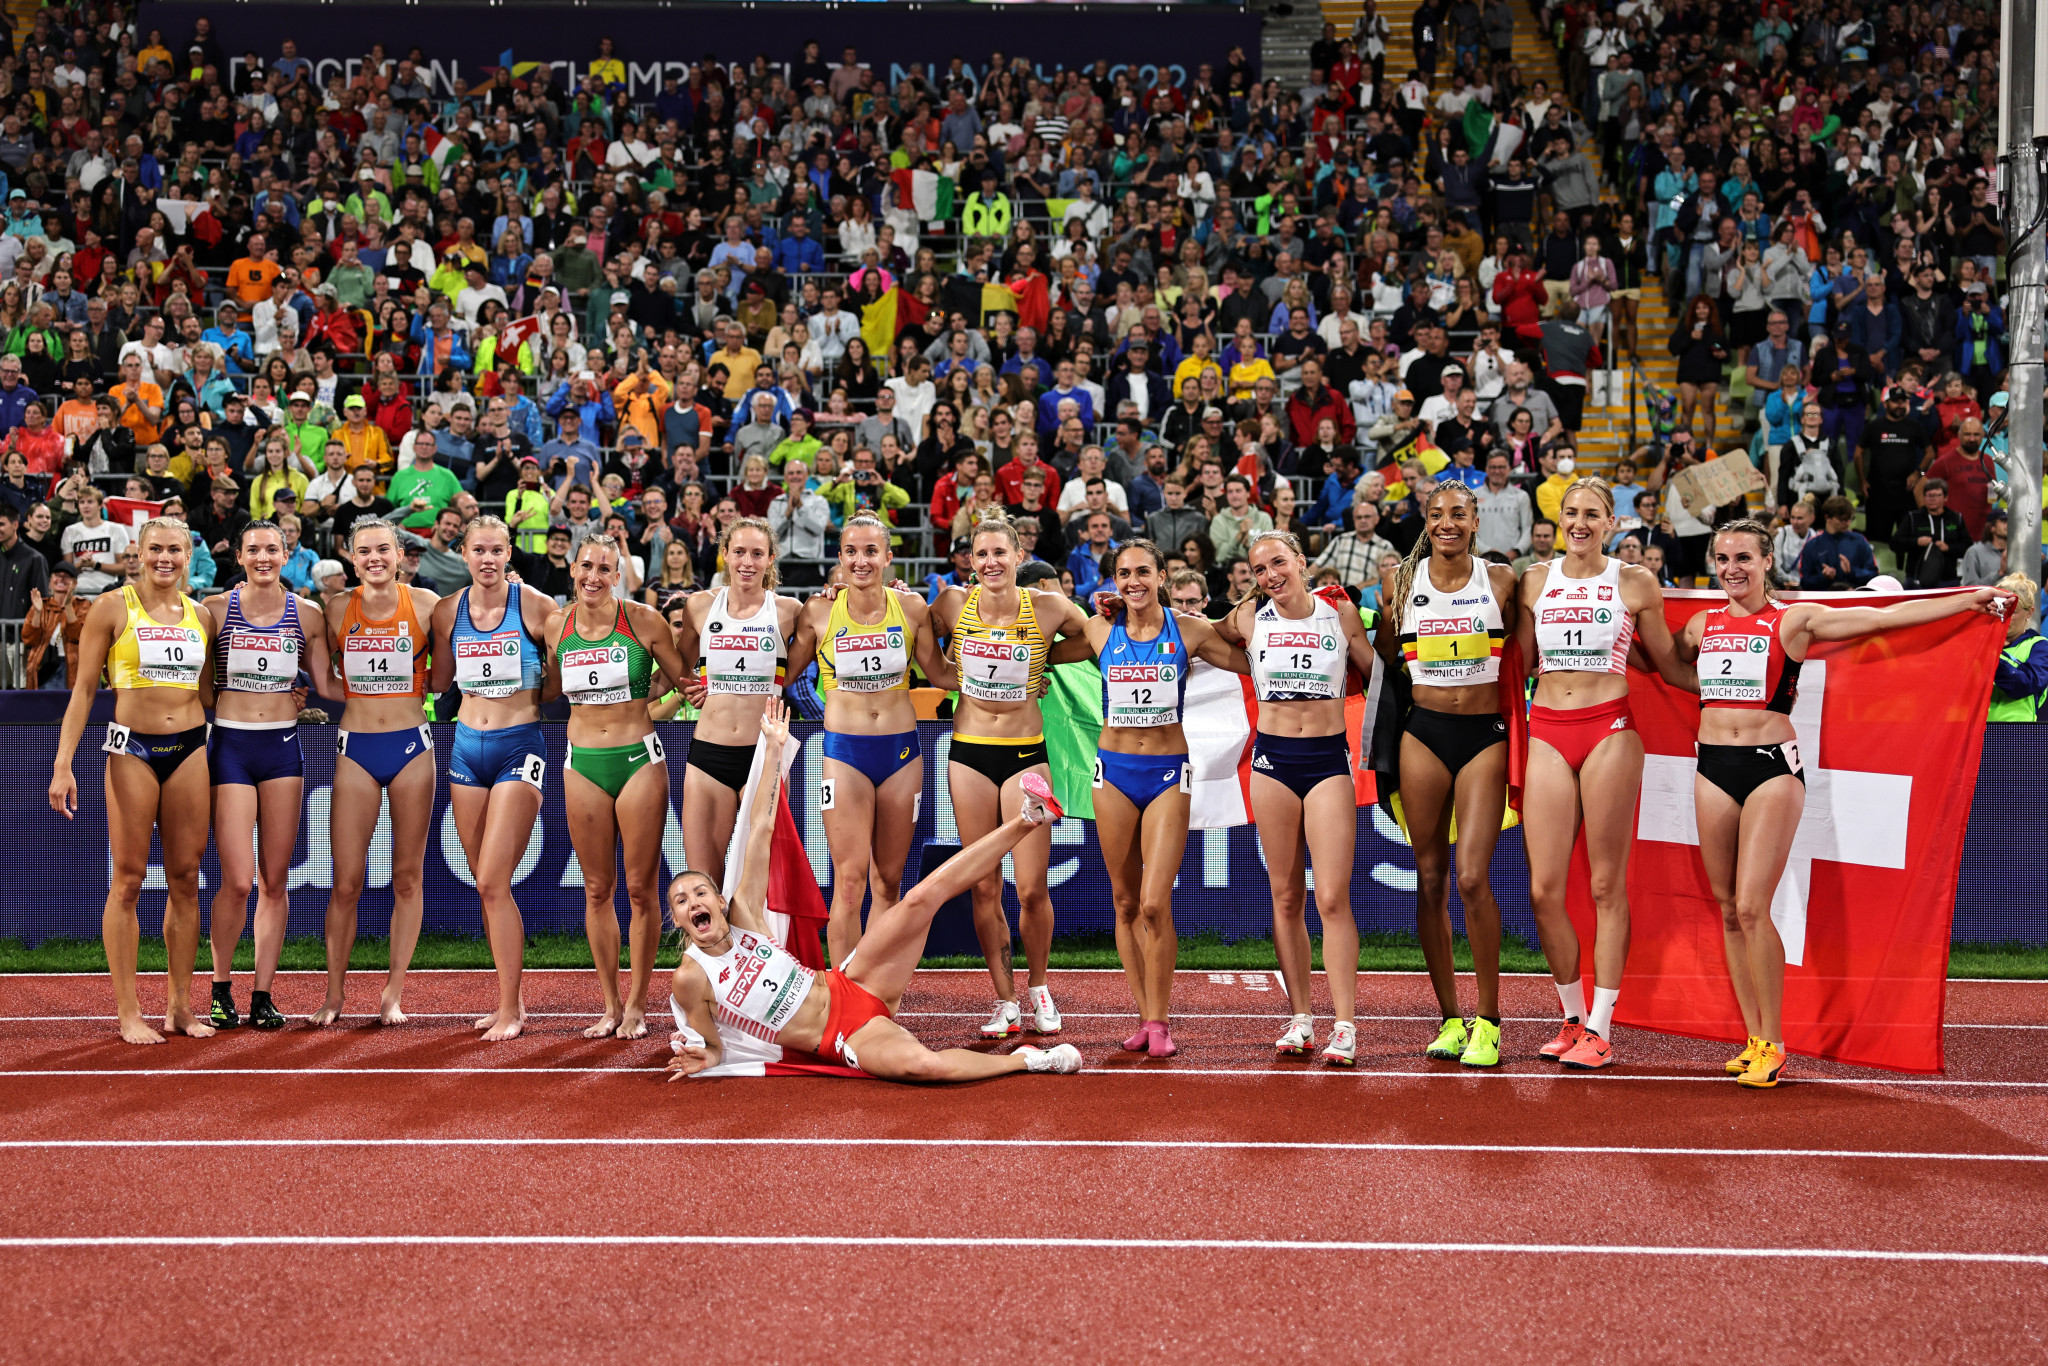 Participants in the women's heptathlon pose for a photo together after two days of gruelling competition ©Getty Images